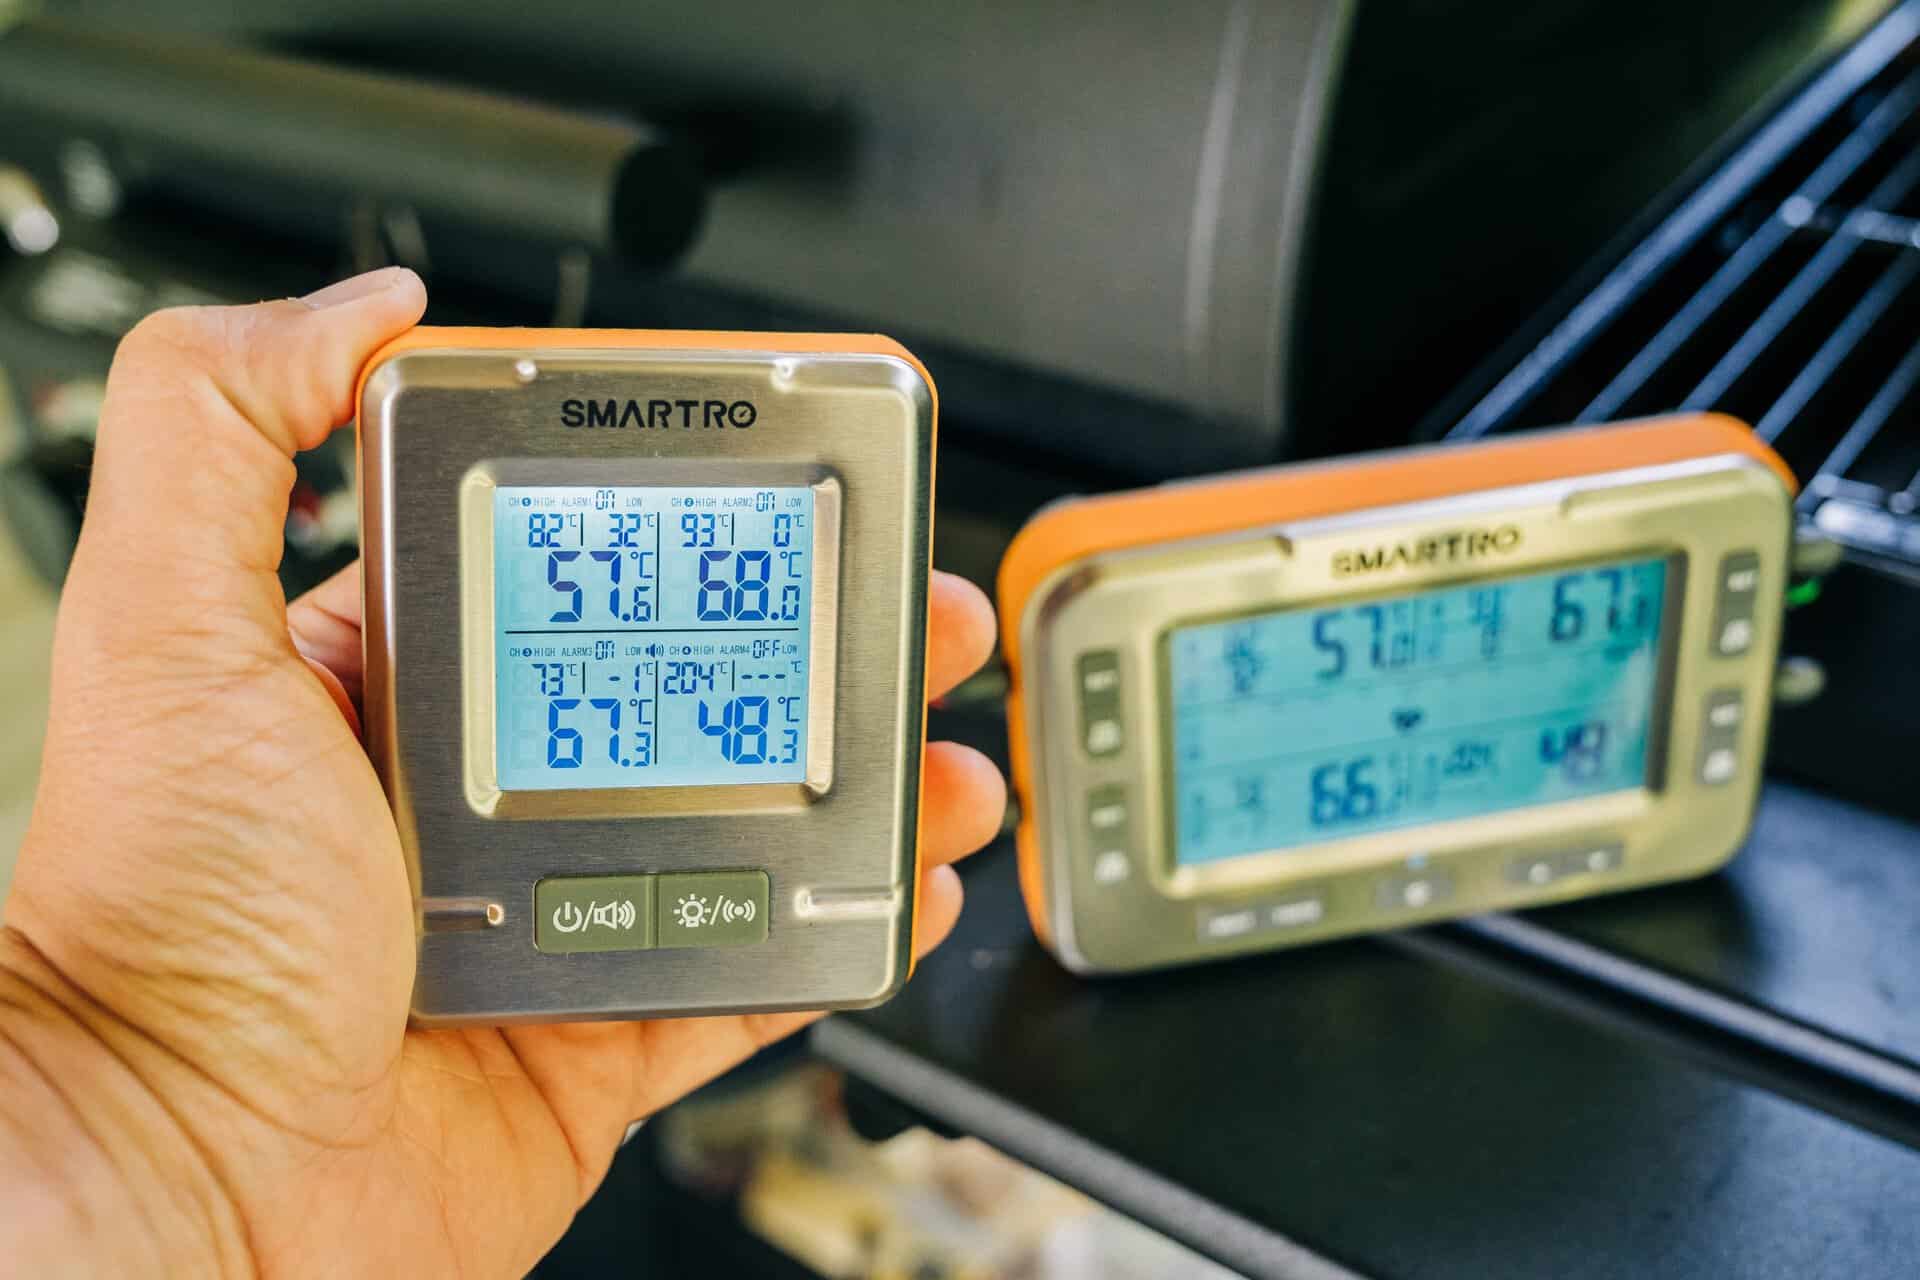 https://www.chefstemp.com/wp-content/uploads/2022/10/smartro-X50-Wireless-Meat-Thermometer-4-Probes-6-scaled.jpg